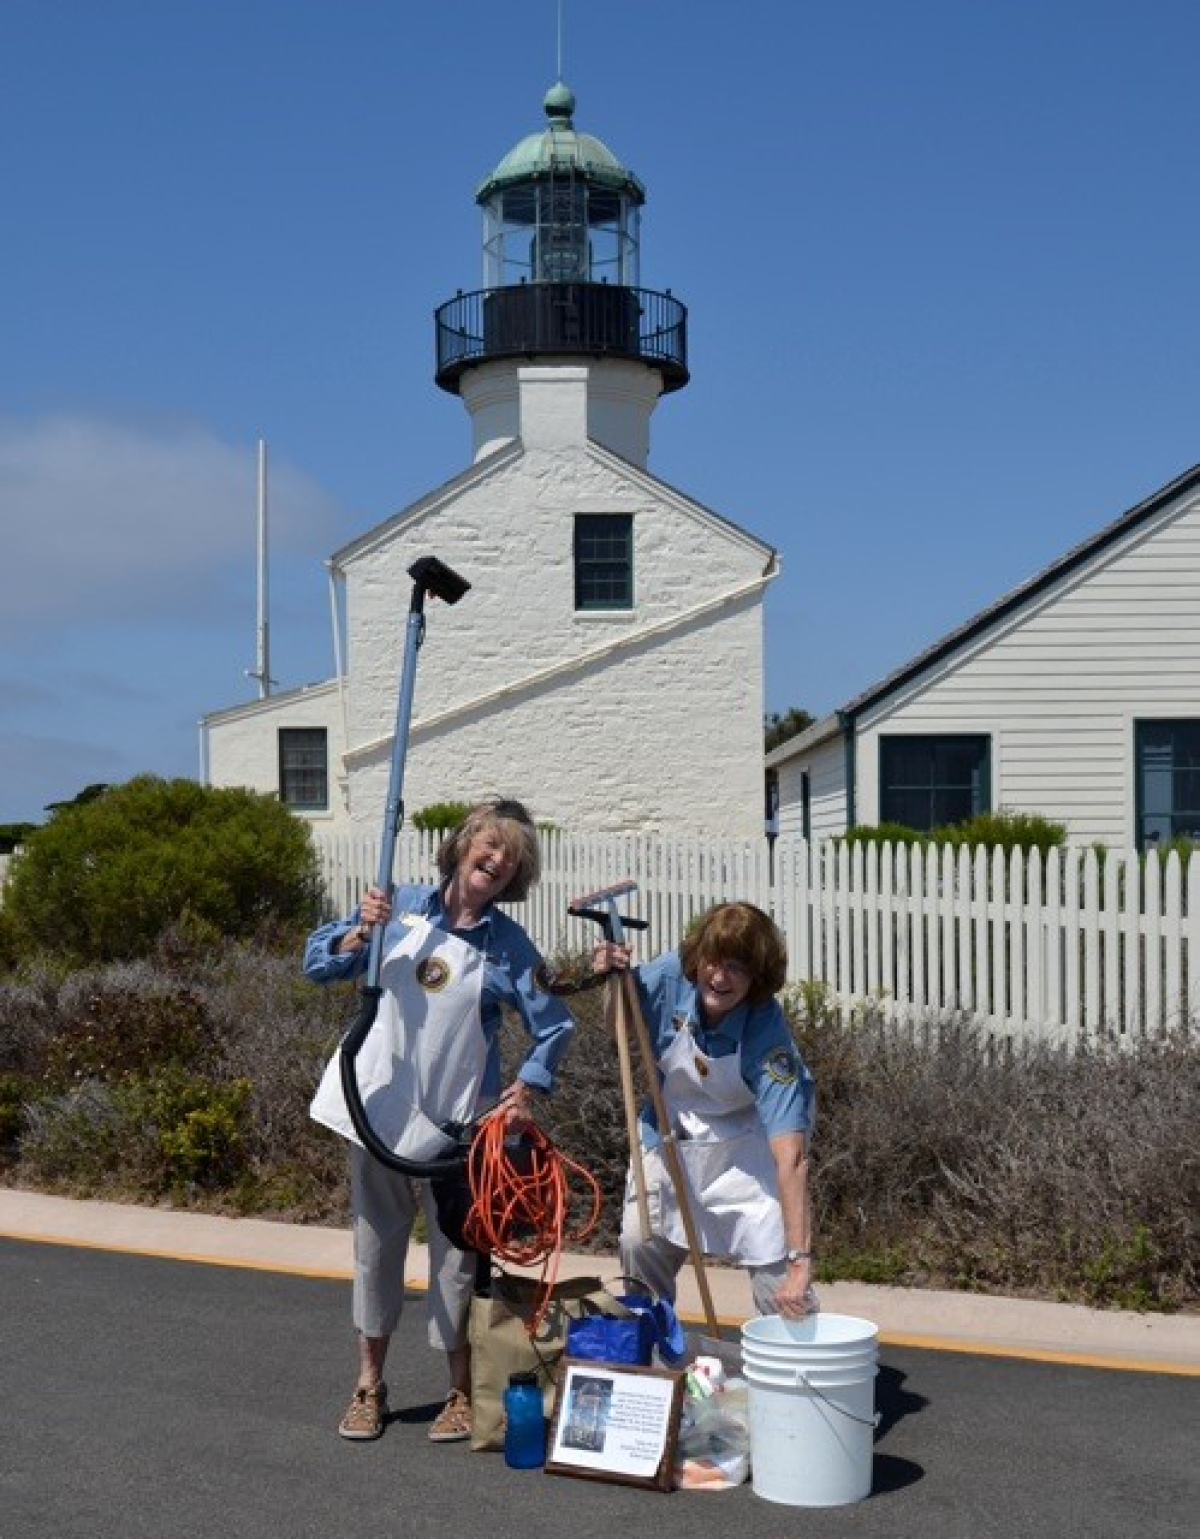 Karen Scanlon, left, with her twin sister Kim Fahlen on their way to complete some lighthouse keeping